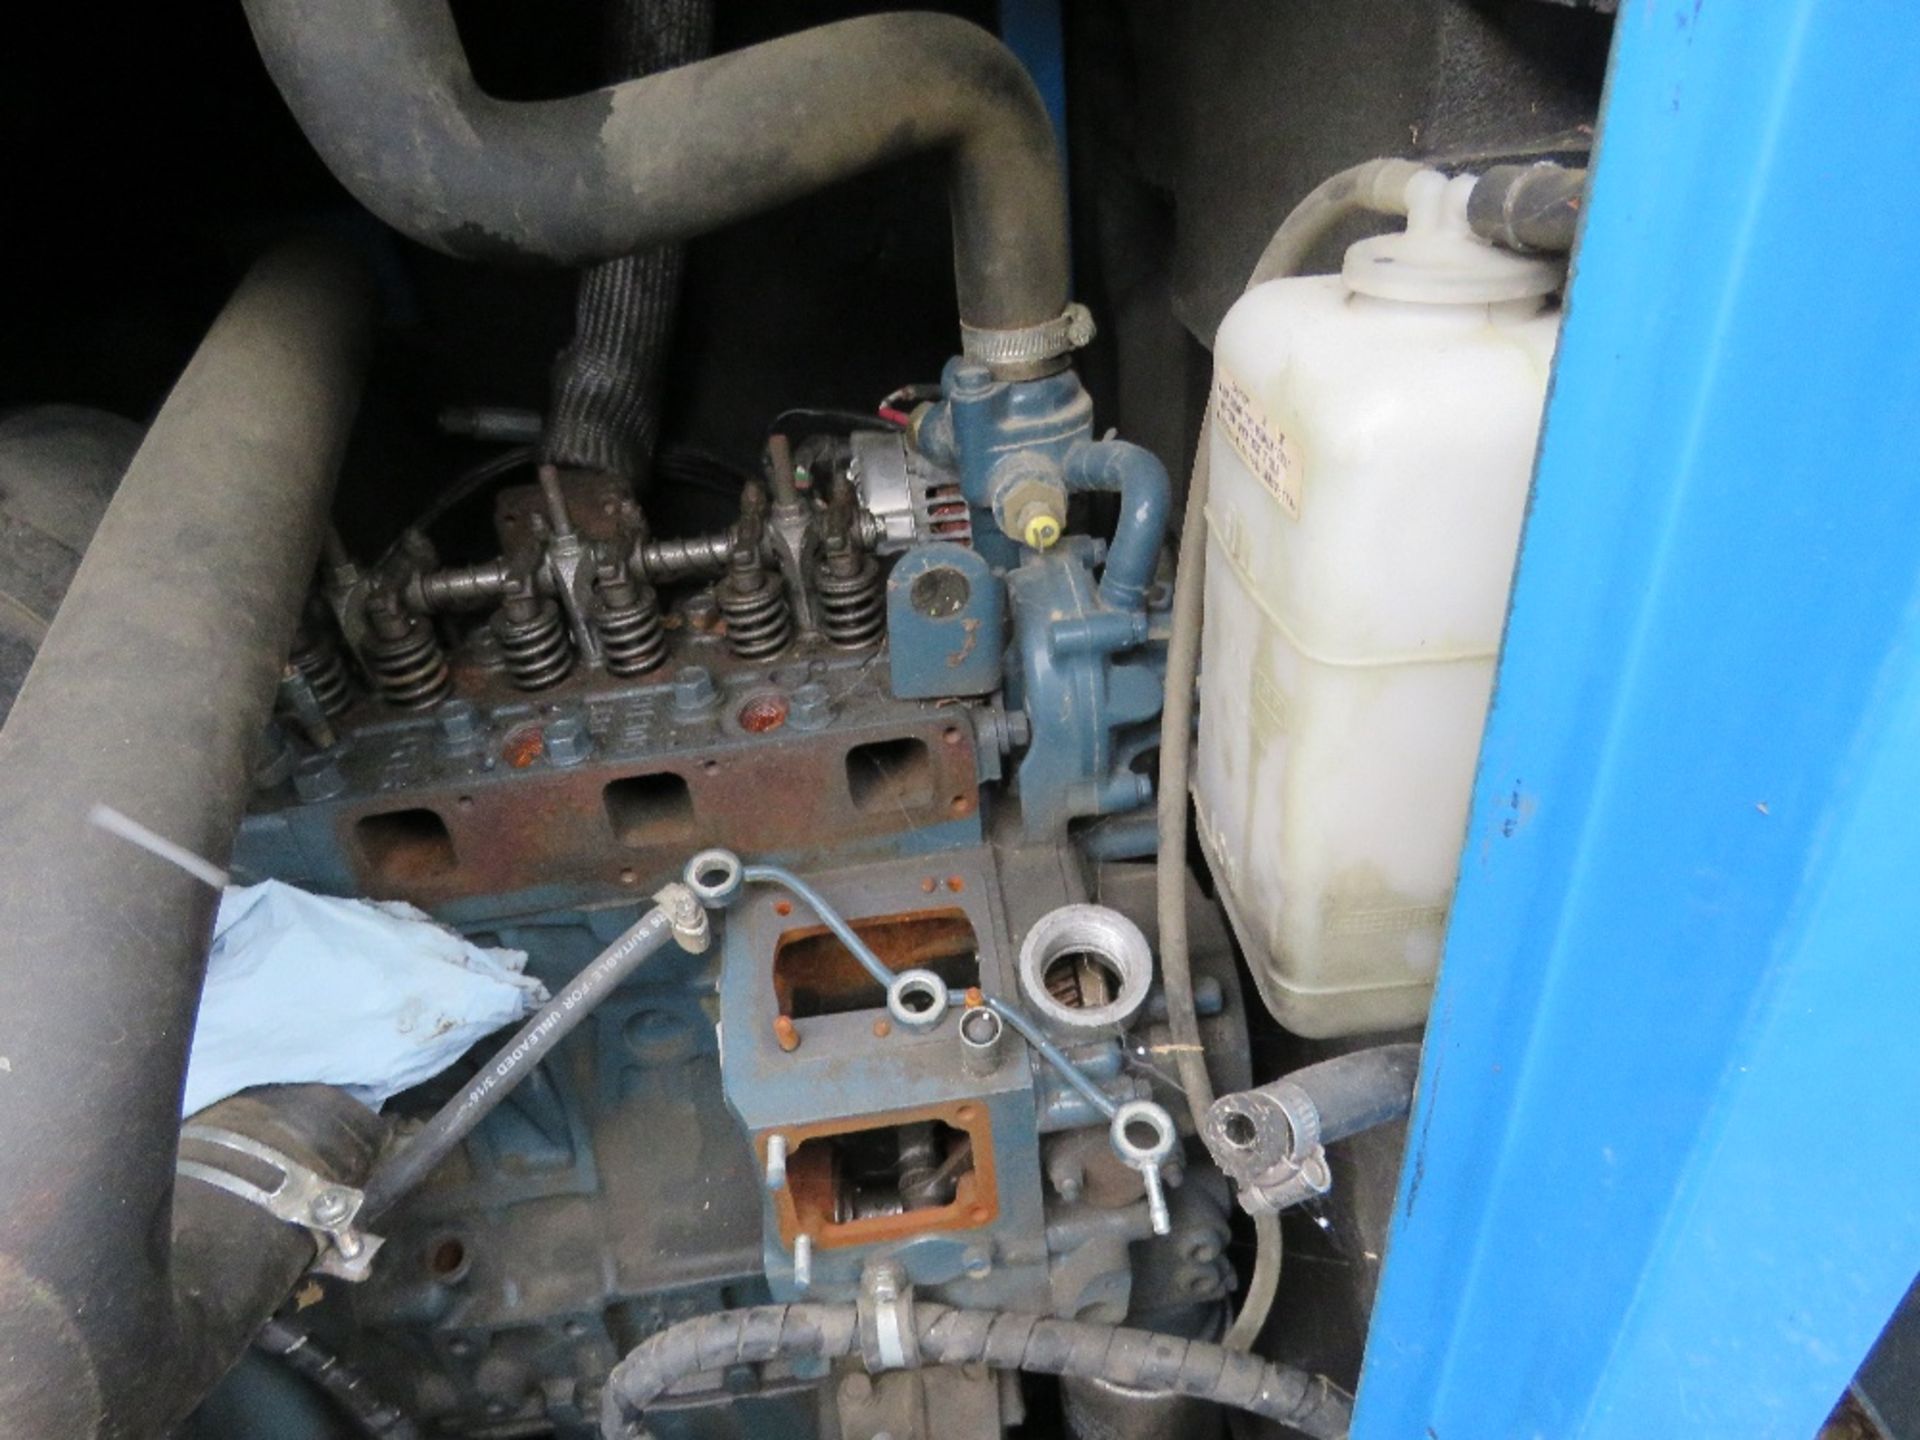 STEPHILL 10KVA COMPACT GENERATOR SET, KUBOTA 3 CYLINDER DIESEL ENGINE. PARTS MISSING AS SHOWN. PREVI - Image 6 of 7